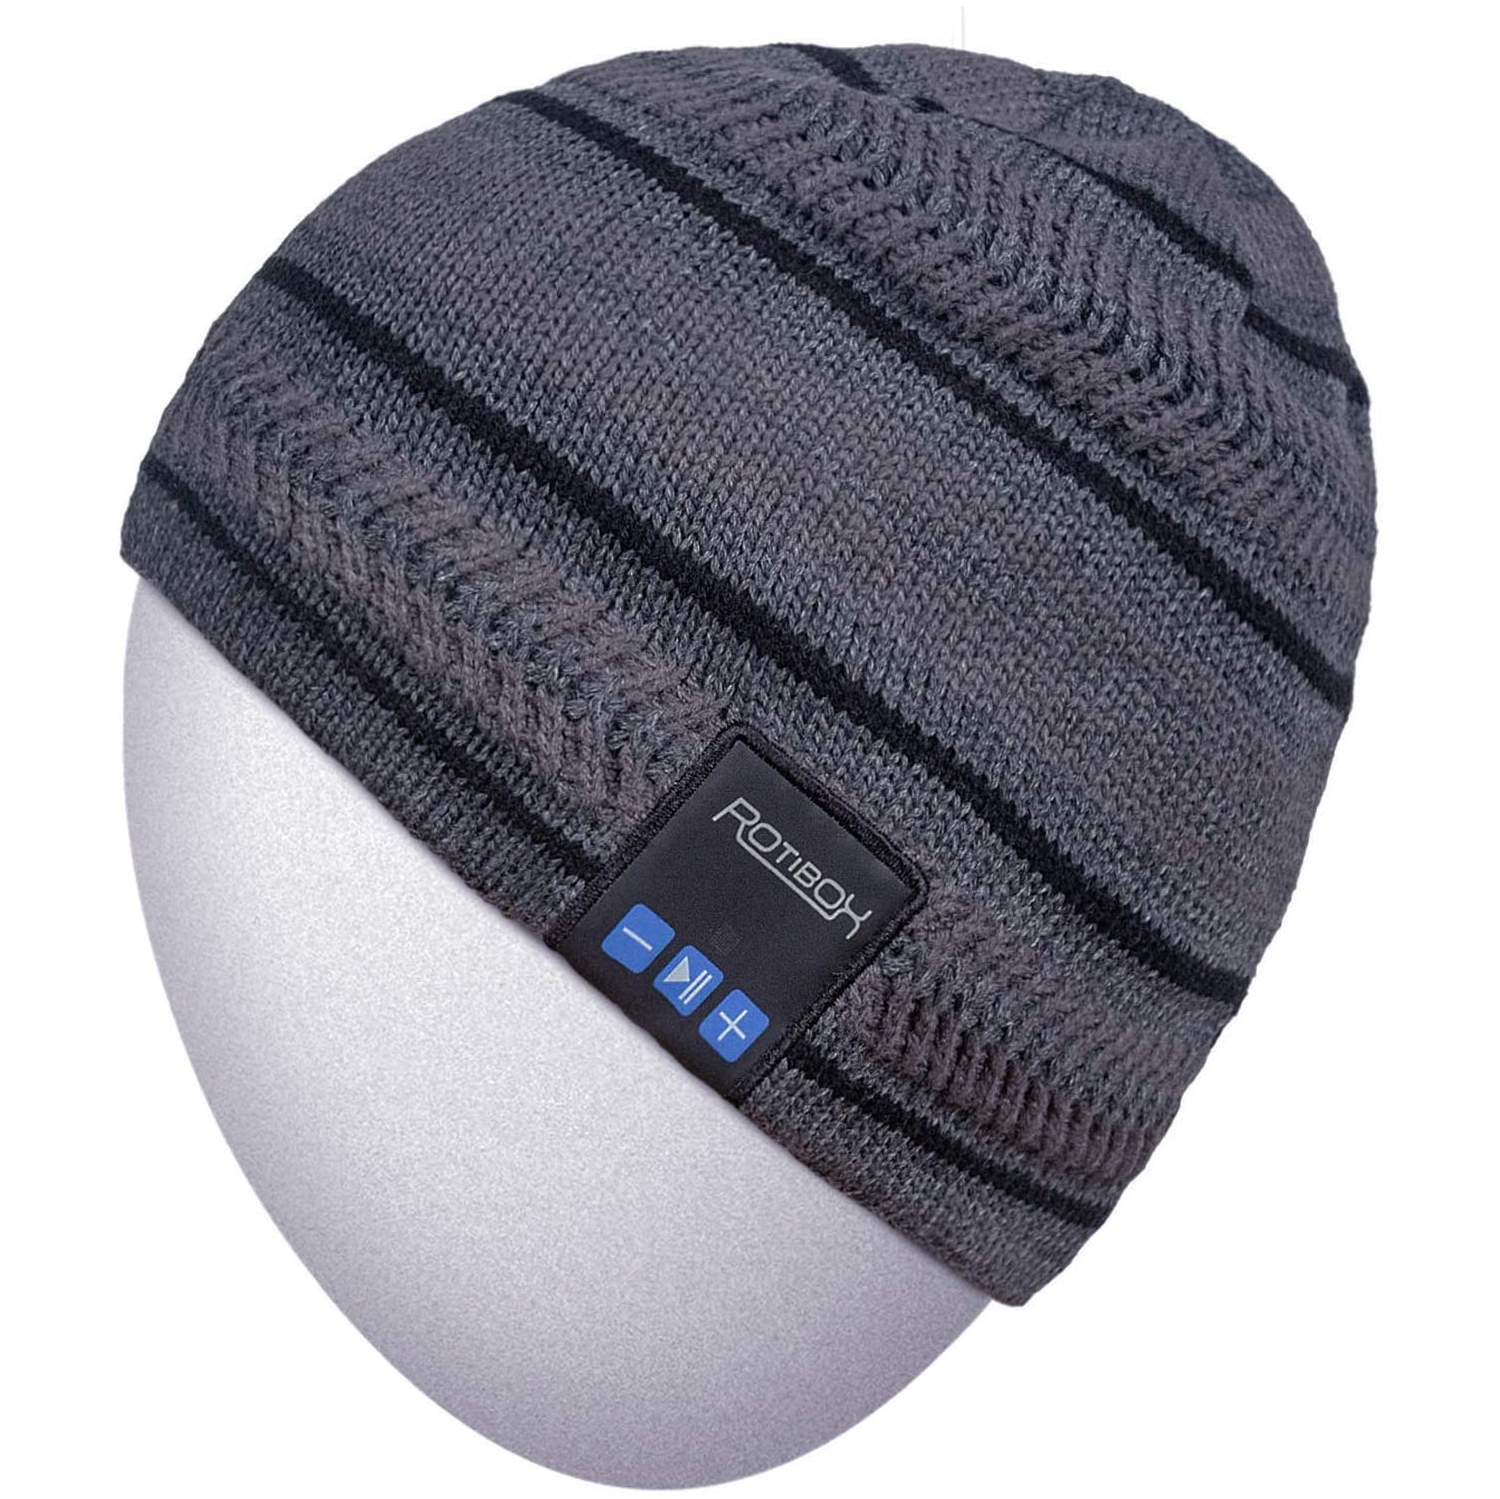 Washable Bluetooth Beanie Hat Pom Pom with Wireless Stereo Over Ear Headphones Headsets Earphone Speaker Hands